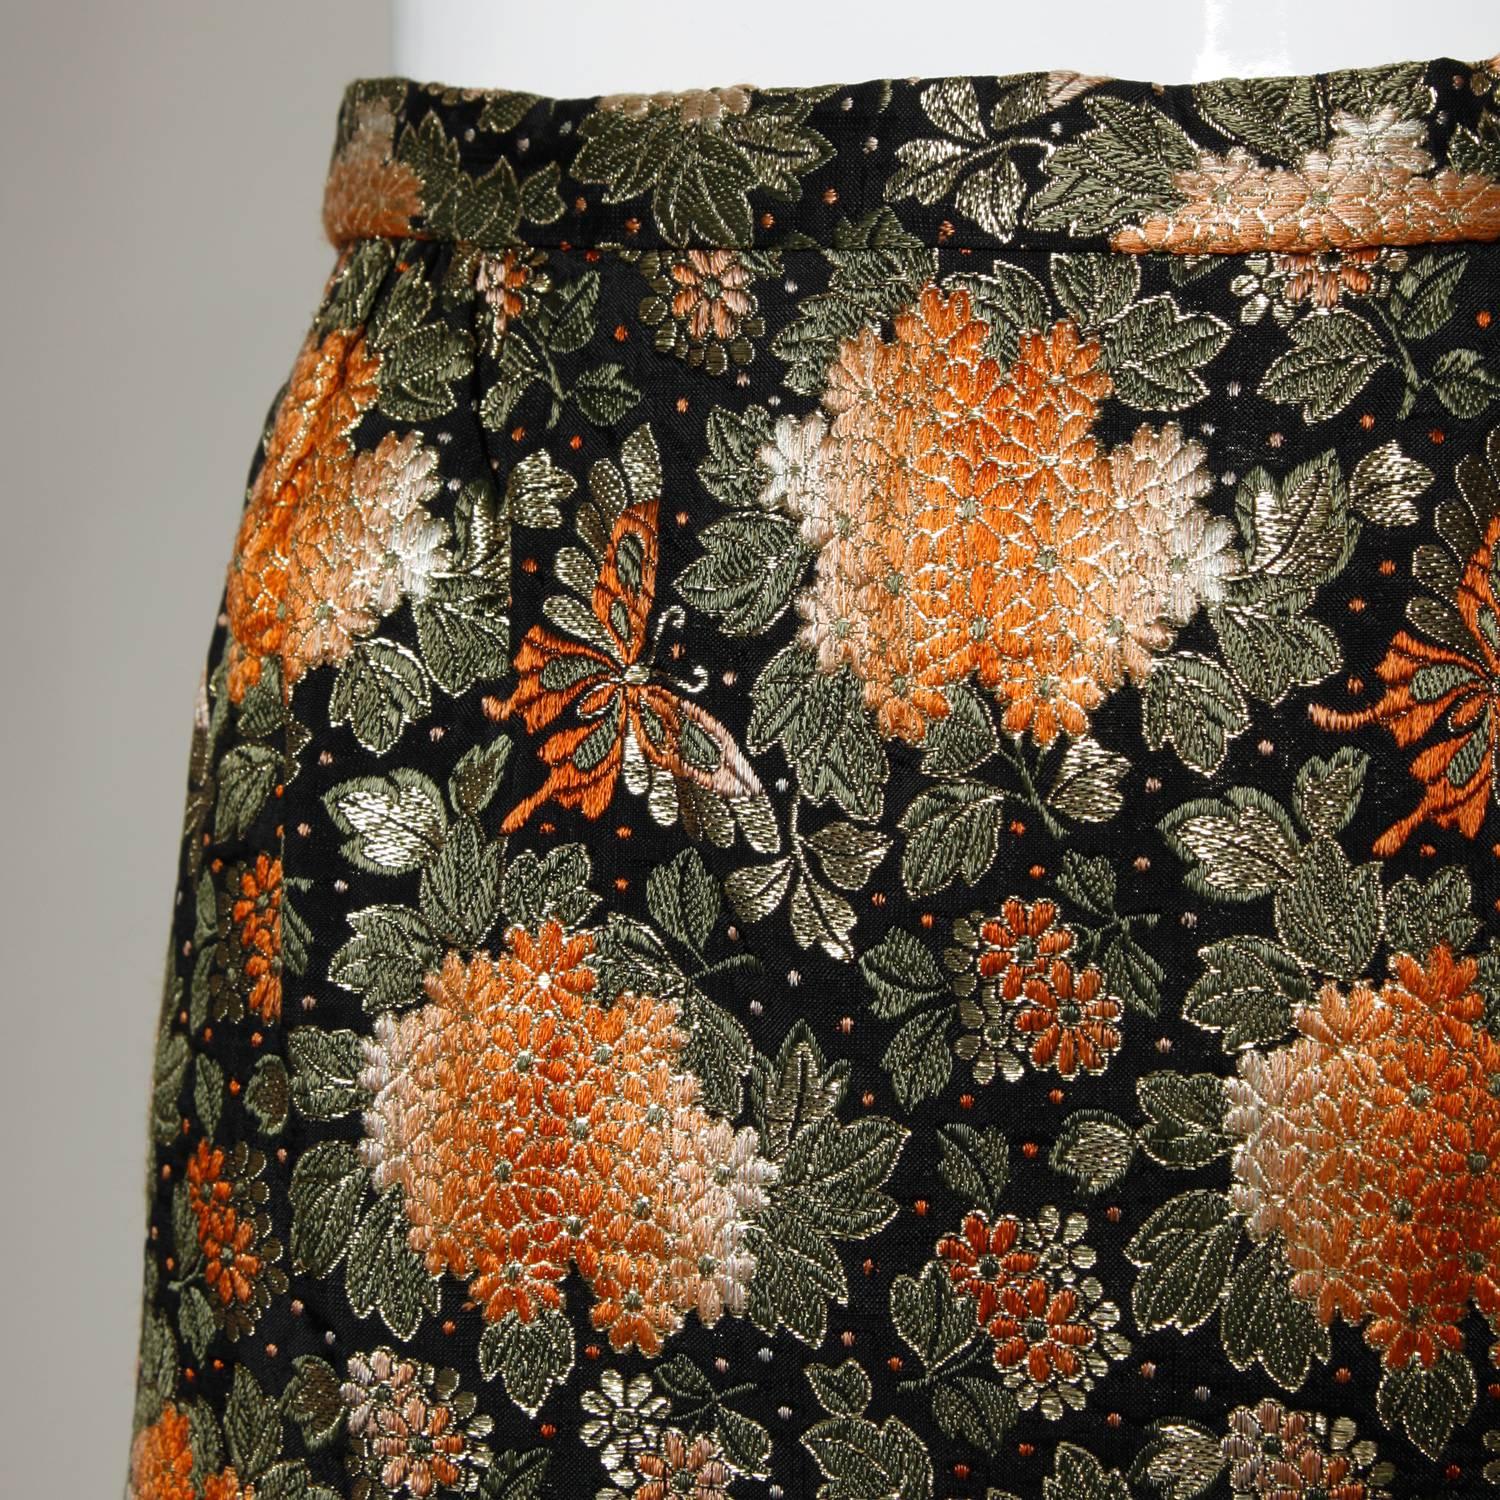 Metallic brocade vintage 1960s maxi skirt with a back slit. 

Details:

Fully Lined
Side Zip and Hook Closure
Marked Size: Not Marked
Estimated Size: S-M
Color: Black/ Gold Metallic/ Orange/ Olive Green/ Light Orange
Fabric: Metallic